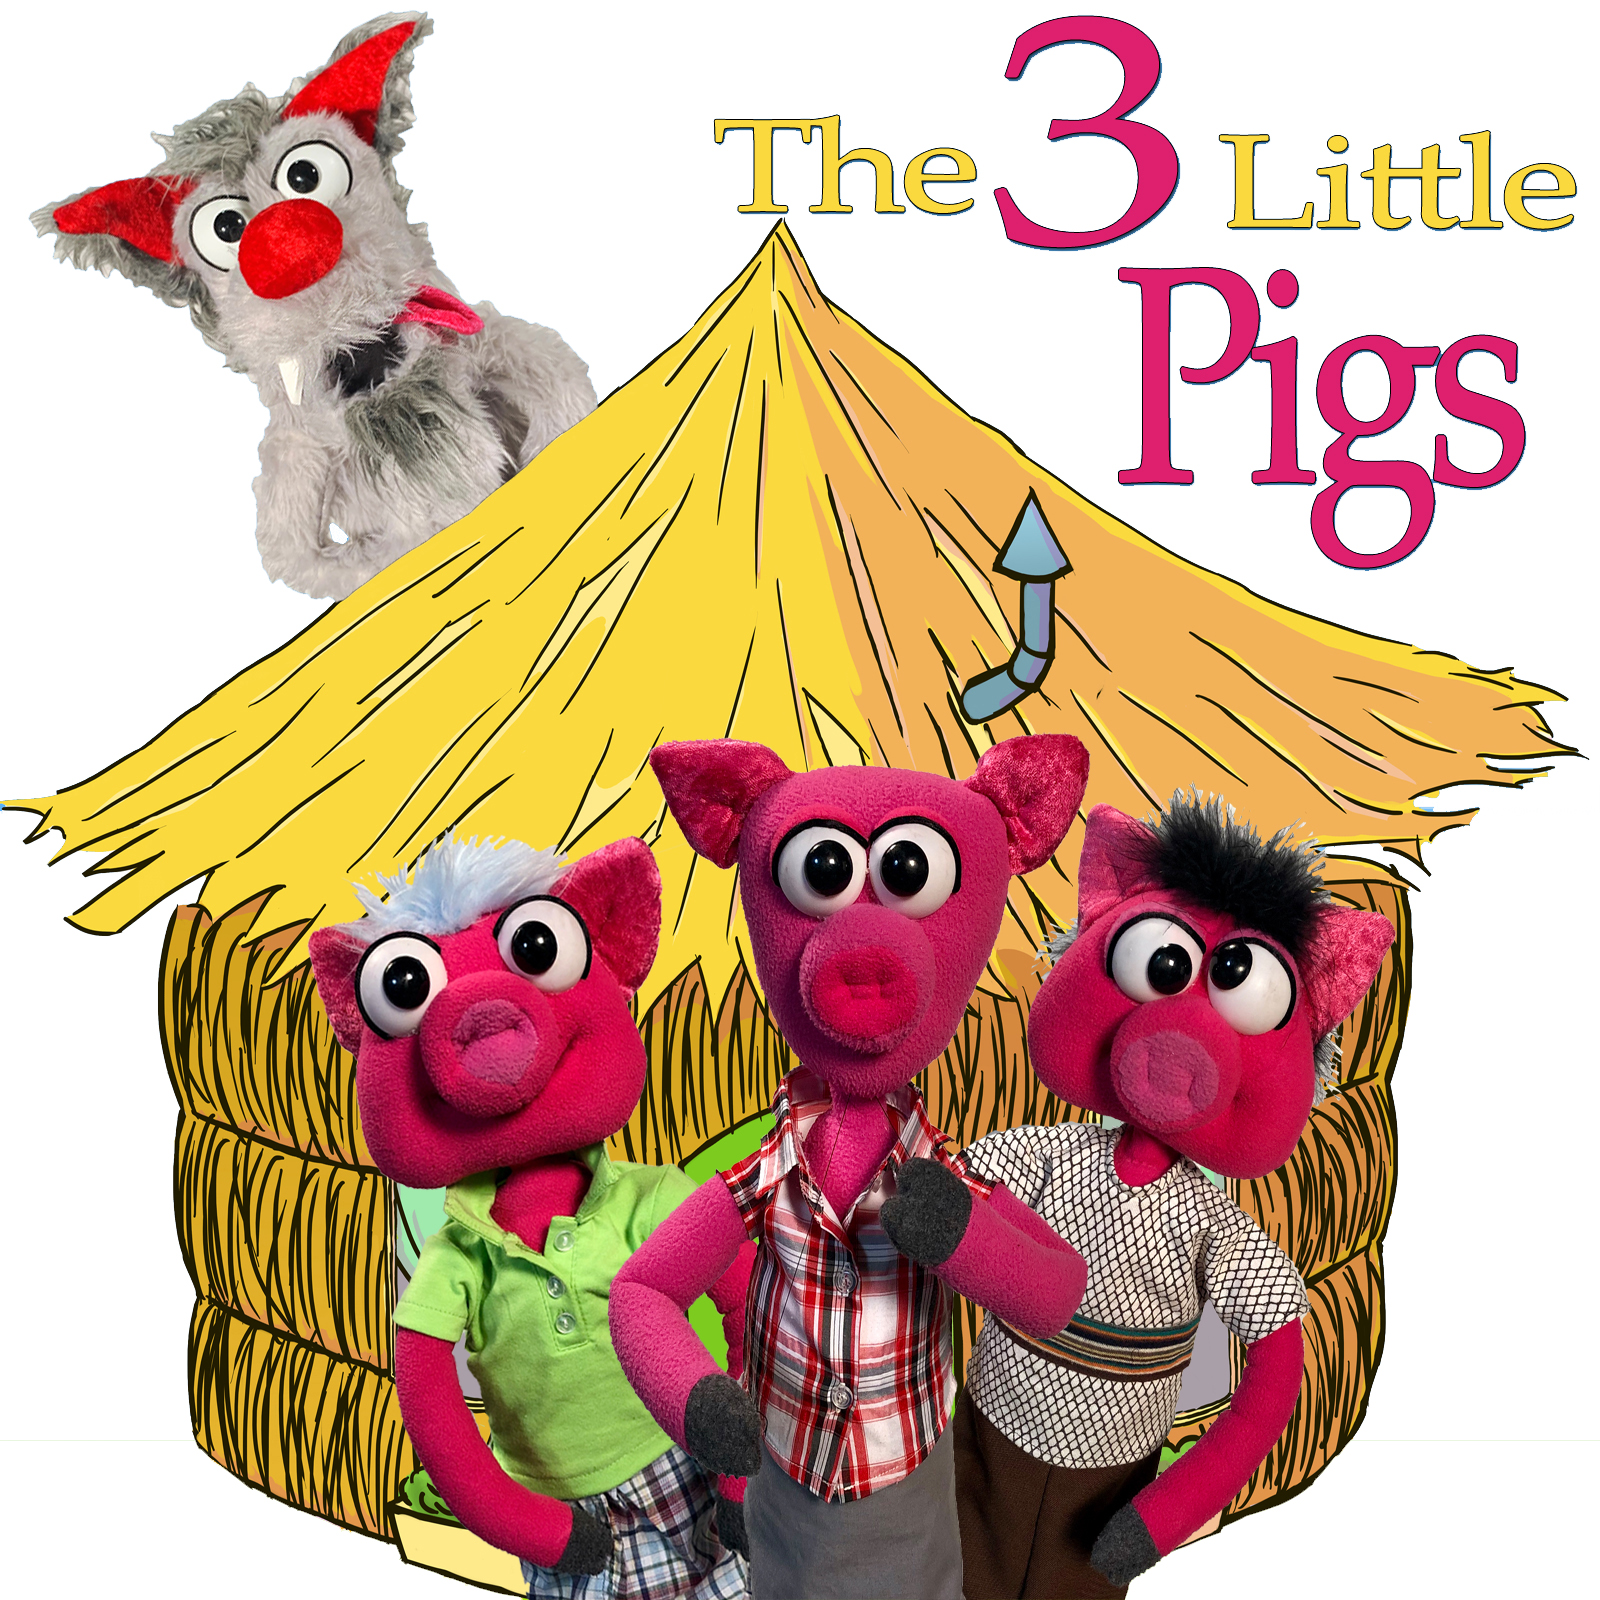 The three little pigs puppet show graphic